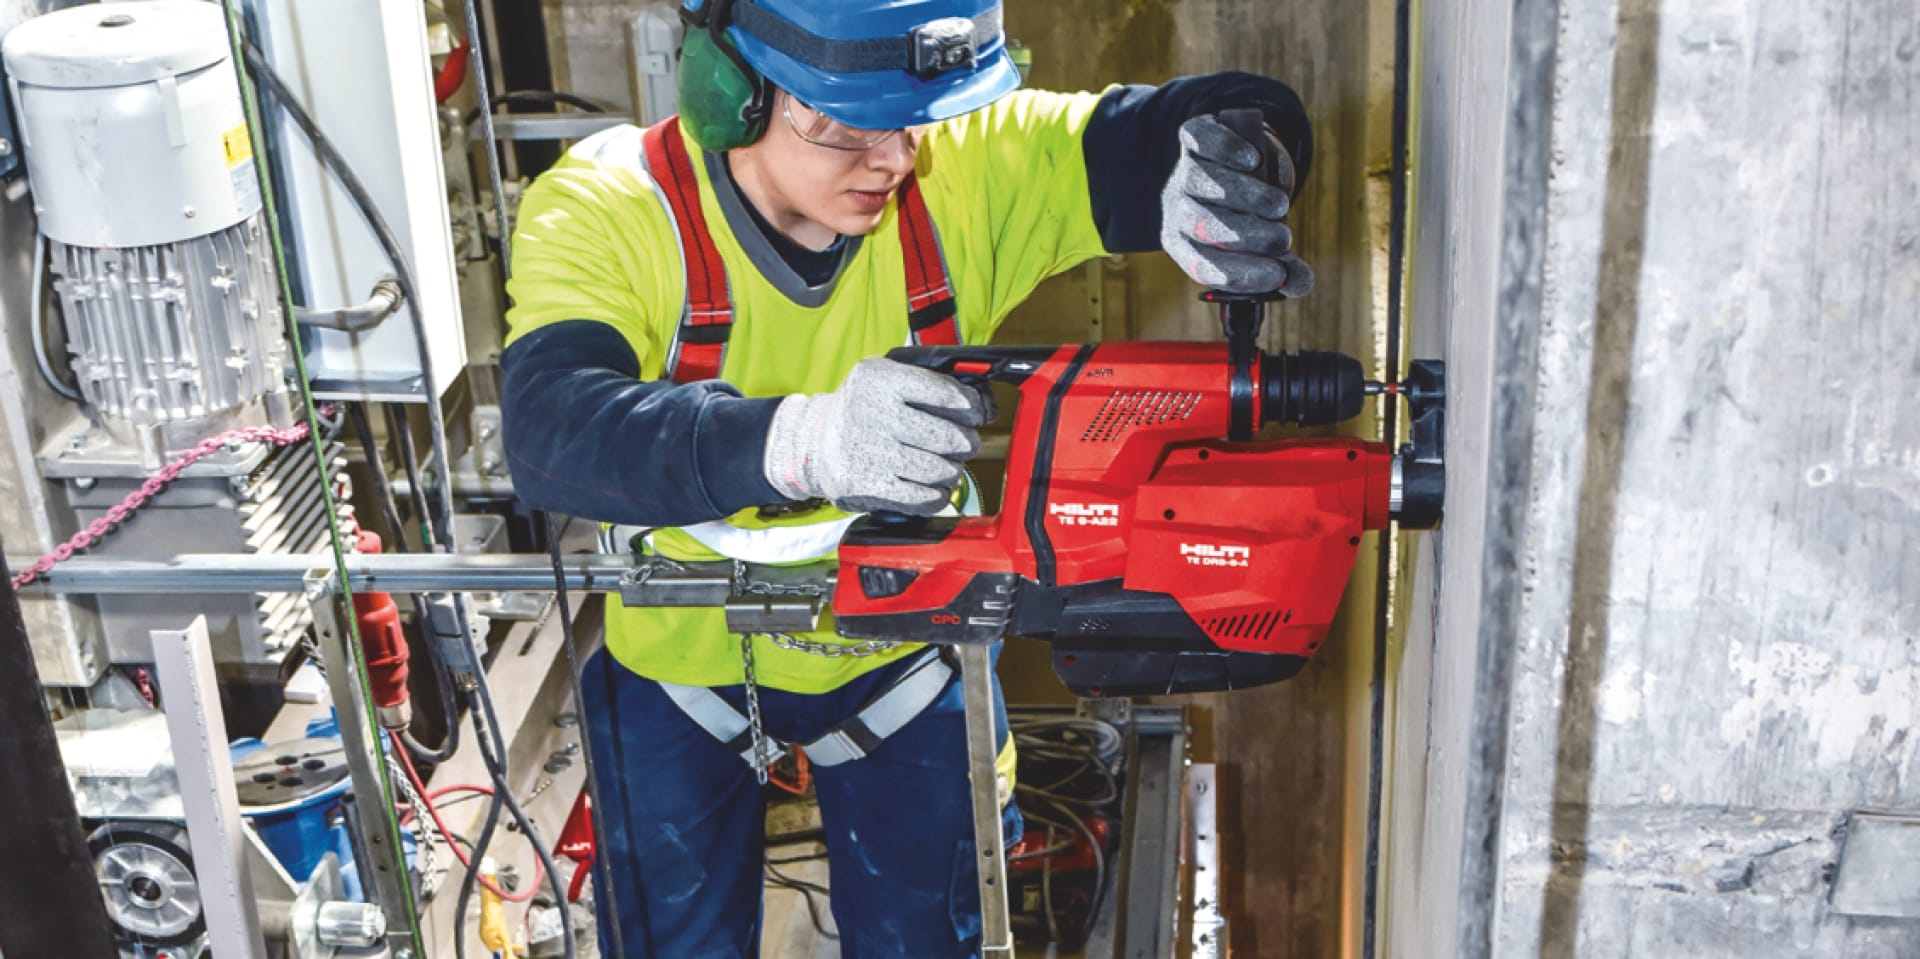 TE 6-A22 cordless rotary hammer being used with an integrated dust removal system